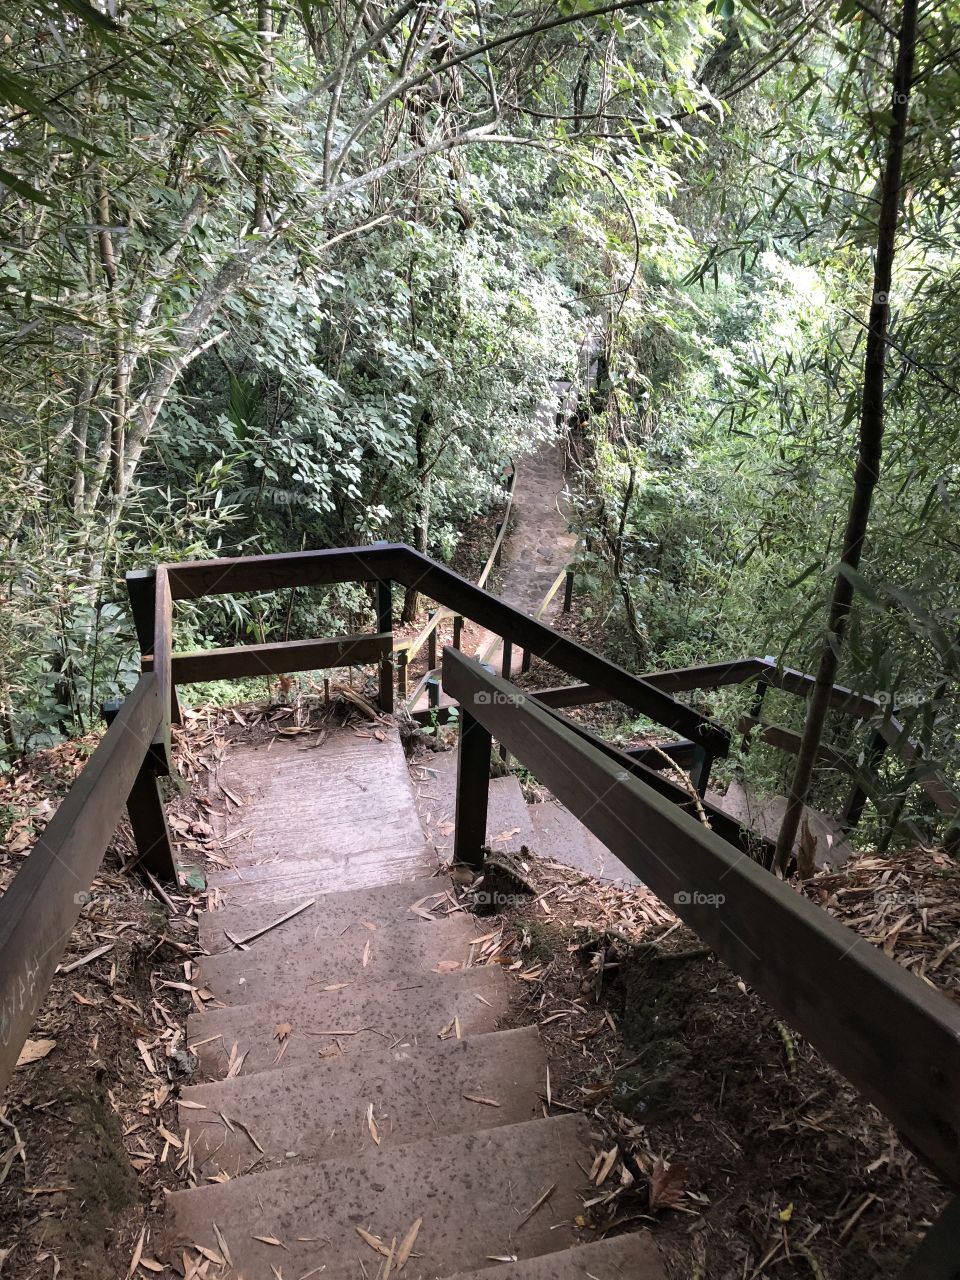 Stair way to the top. On a bright hot summer day, nothing was better than finding this trail under some bamboo trees. 